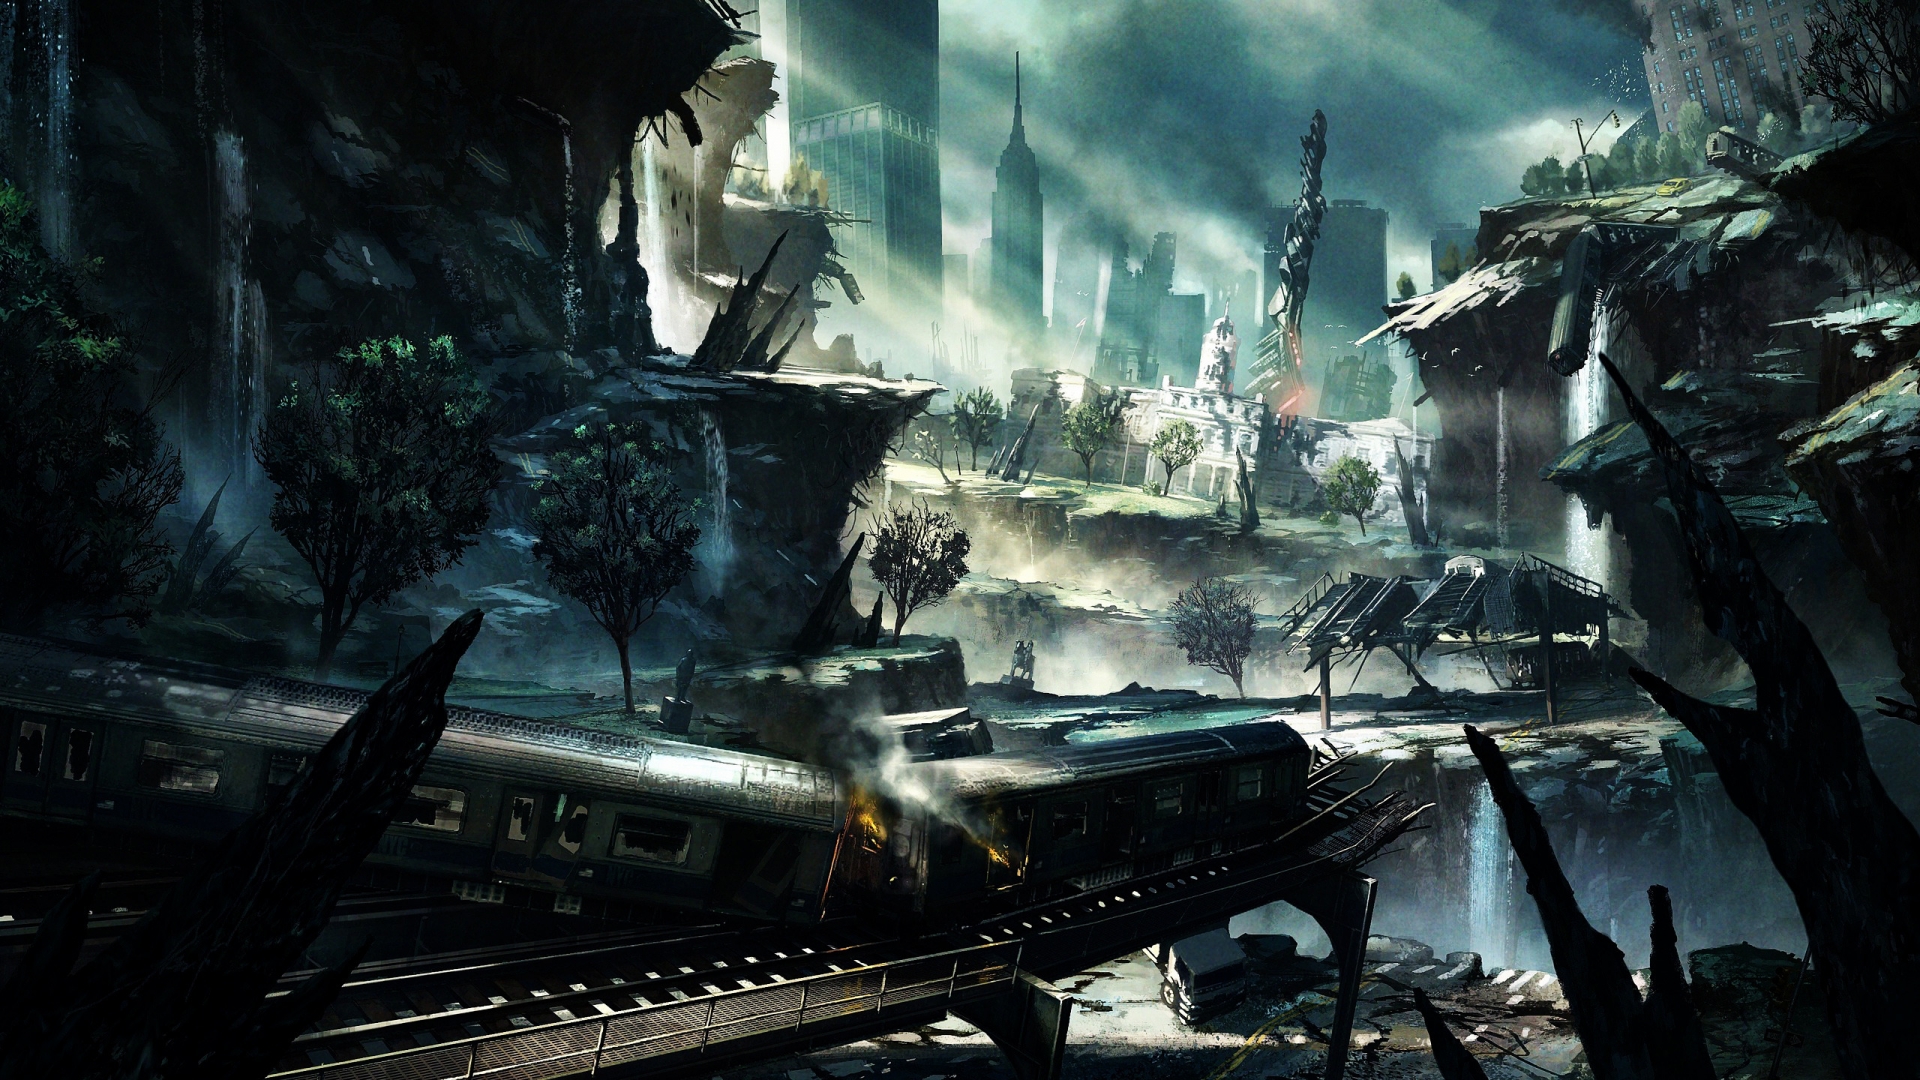 Crysis 2 Poster for 1920 x 1080 HDTV 1080p resolution